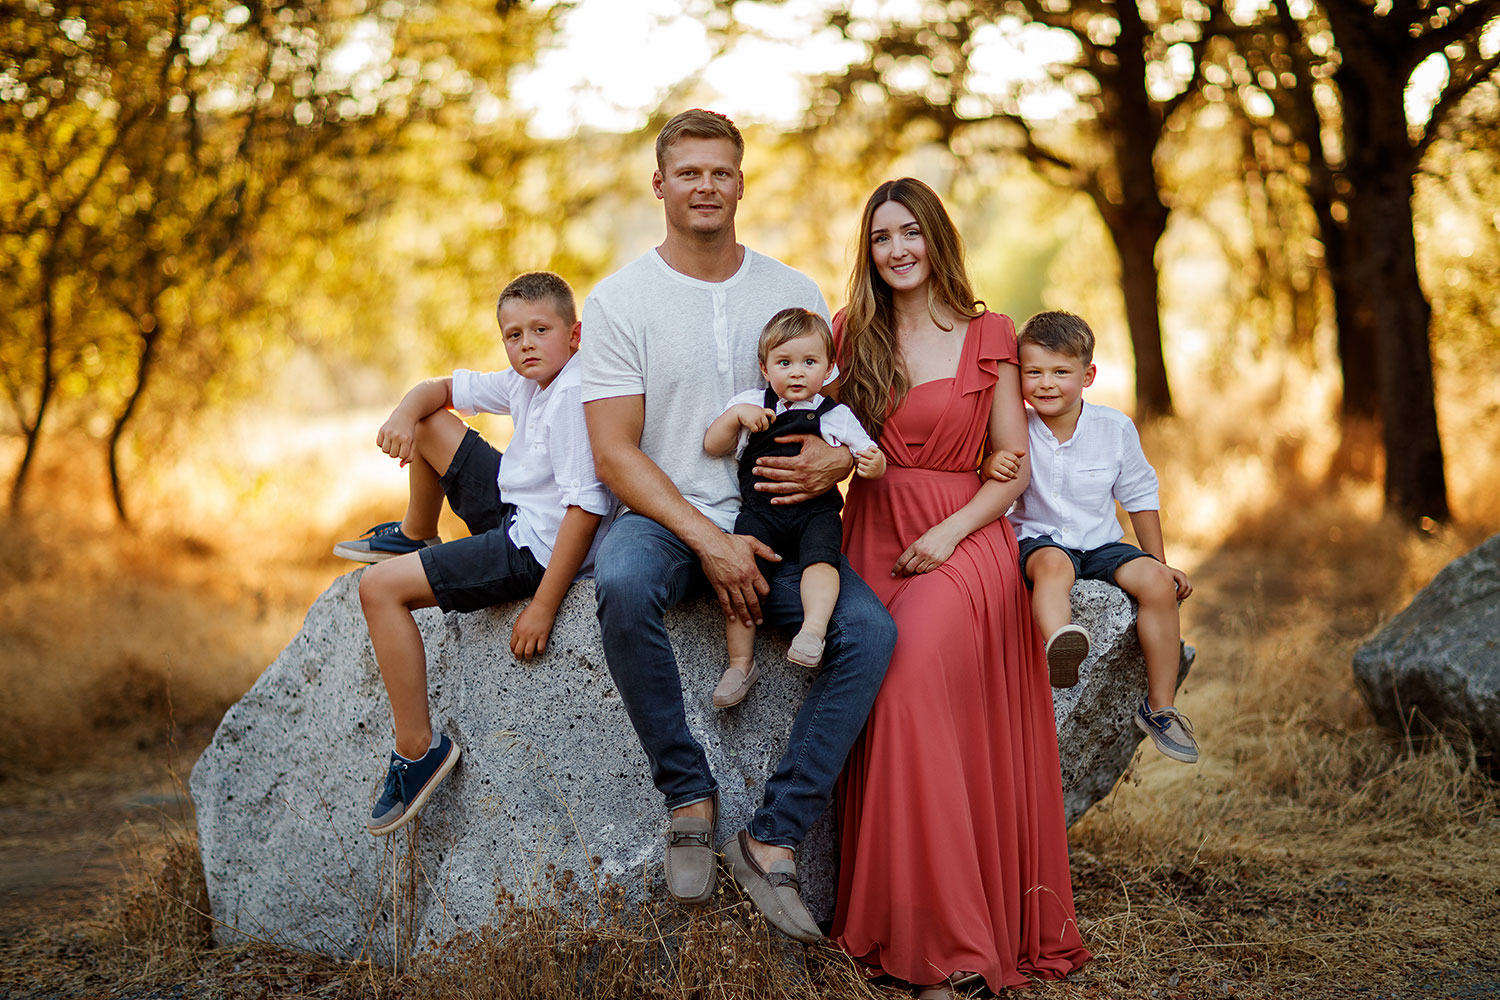 How to Look Awesome in Family Beach Photos | Smiles Beach Photo